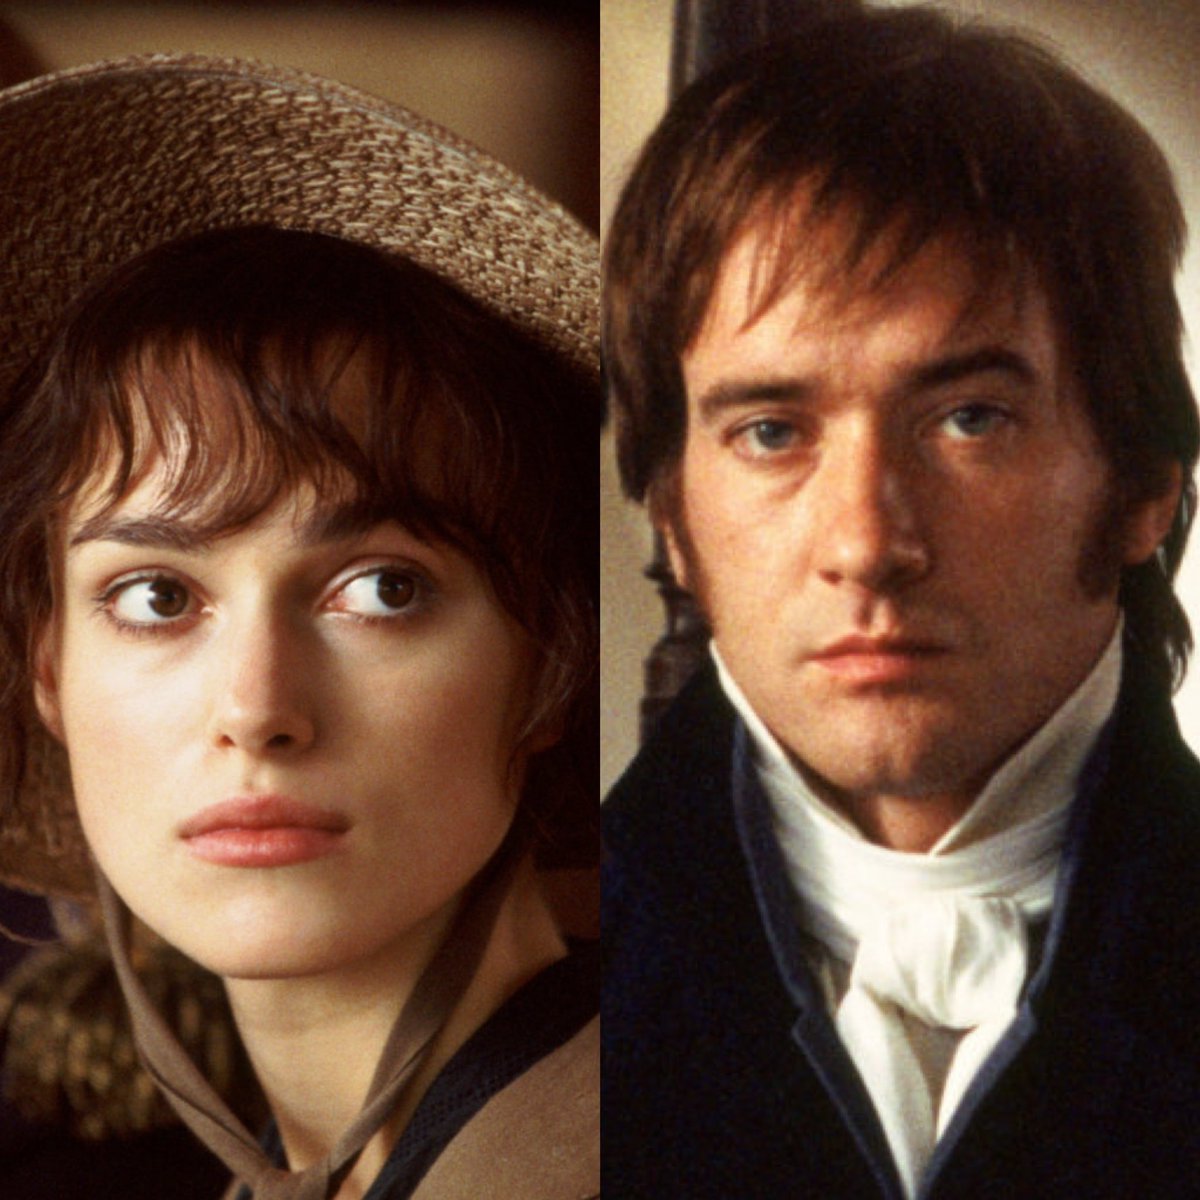 #HappyEaster Everyone! 😊⛪️✨🙏🏼✝️🙏🏻✨

#Easter at Rosings in #PrideandPrejudice 📖

...and it was not till Easter-day, almost a week after the gentlemen's arrival, that they were honoured by such an attention... -Chapter 31